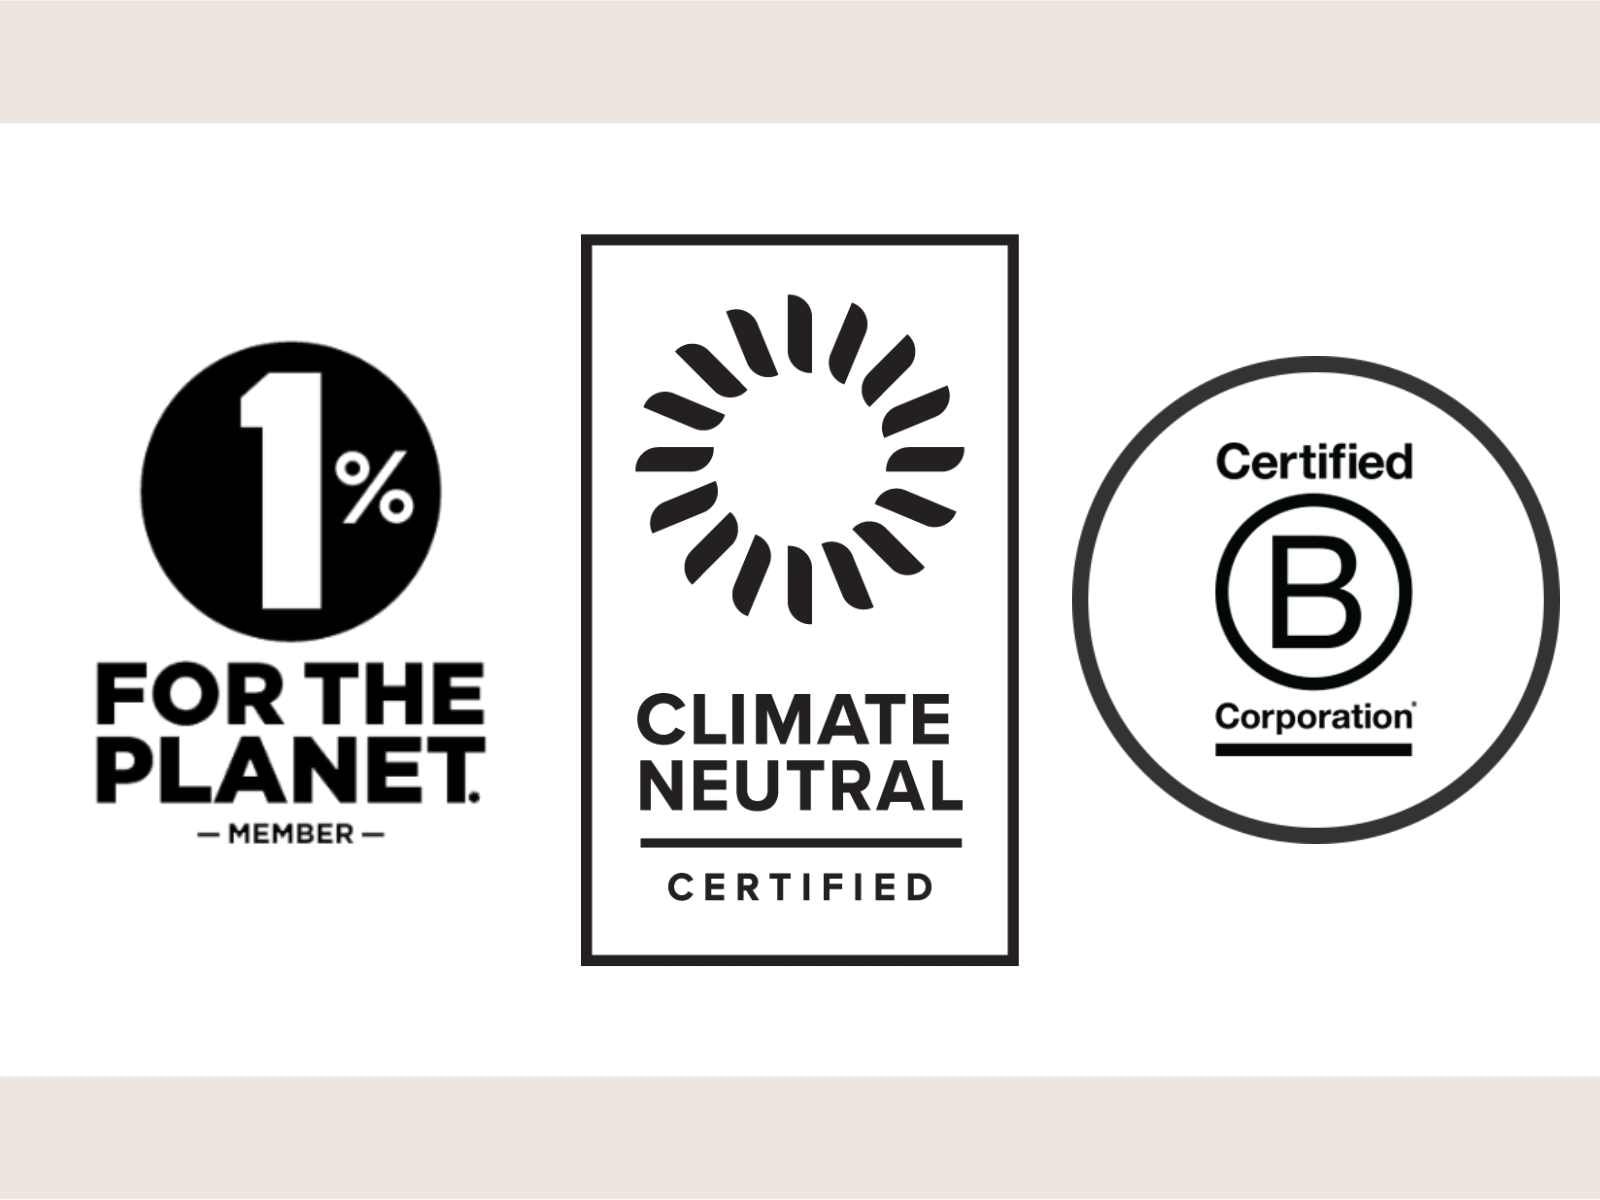 1% for the planet, climate neutral, and B Corp logos in an infographic. 